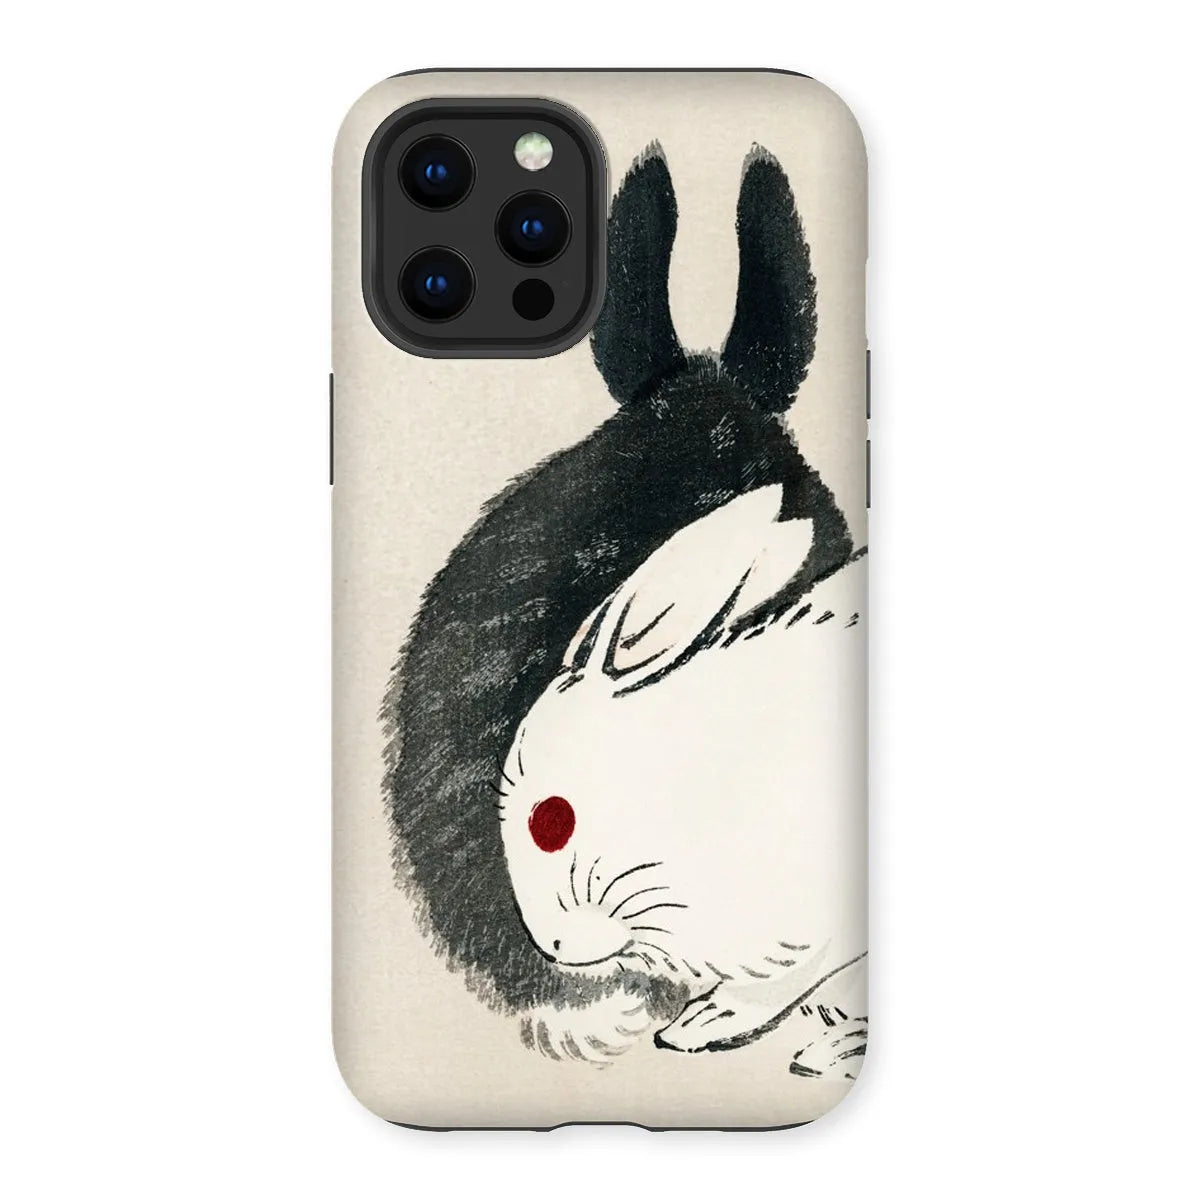 Rabbits - Black And White Meiji Art Phone Case - Kōno Bairei - Iphone 12 Pro Max / Matte - Mobile Phone Cases